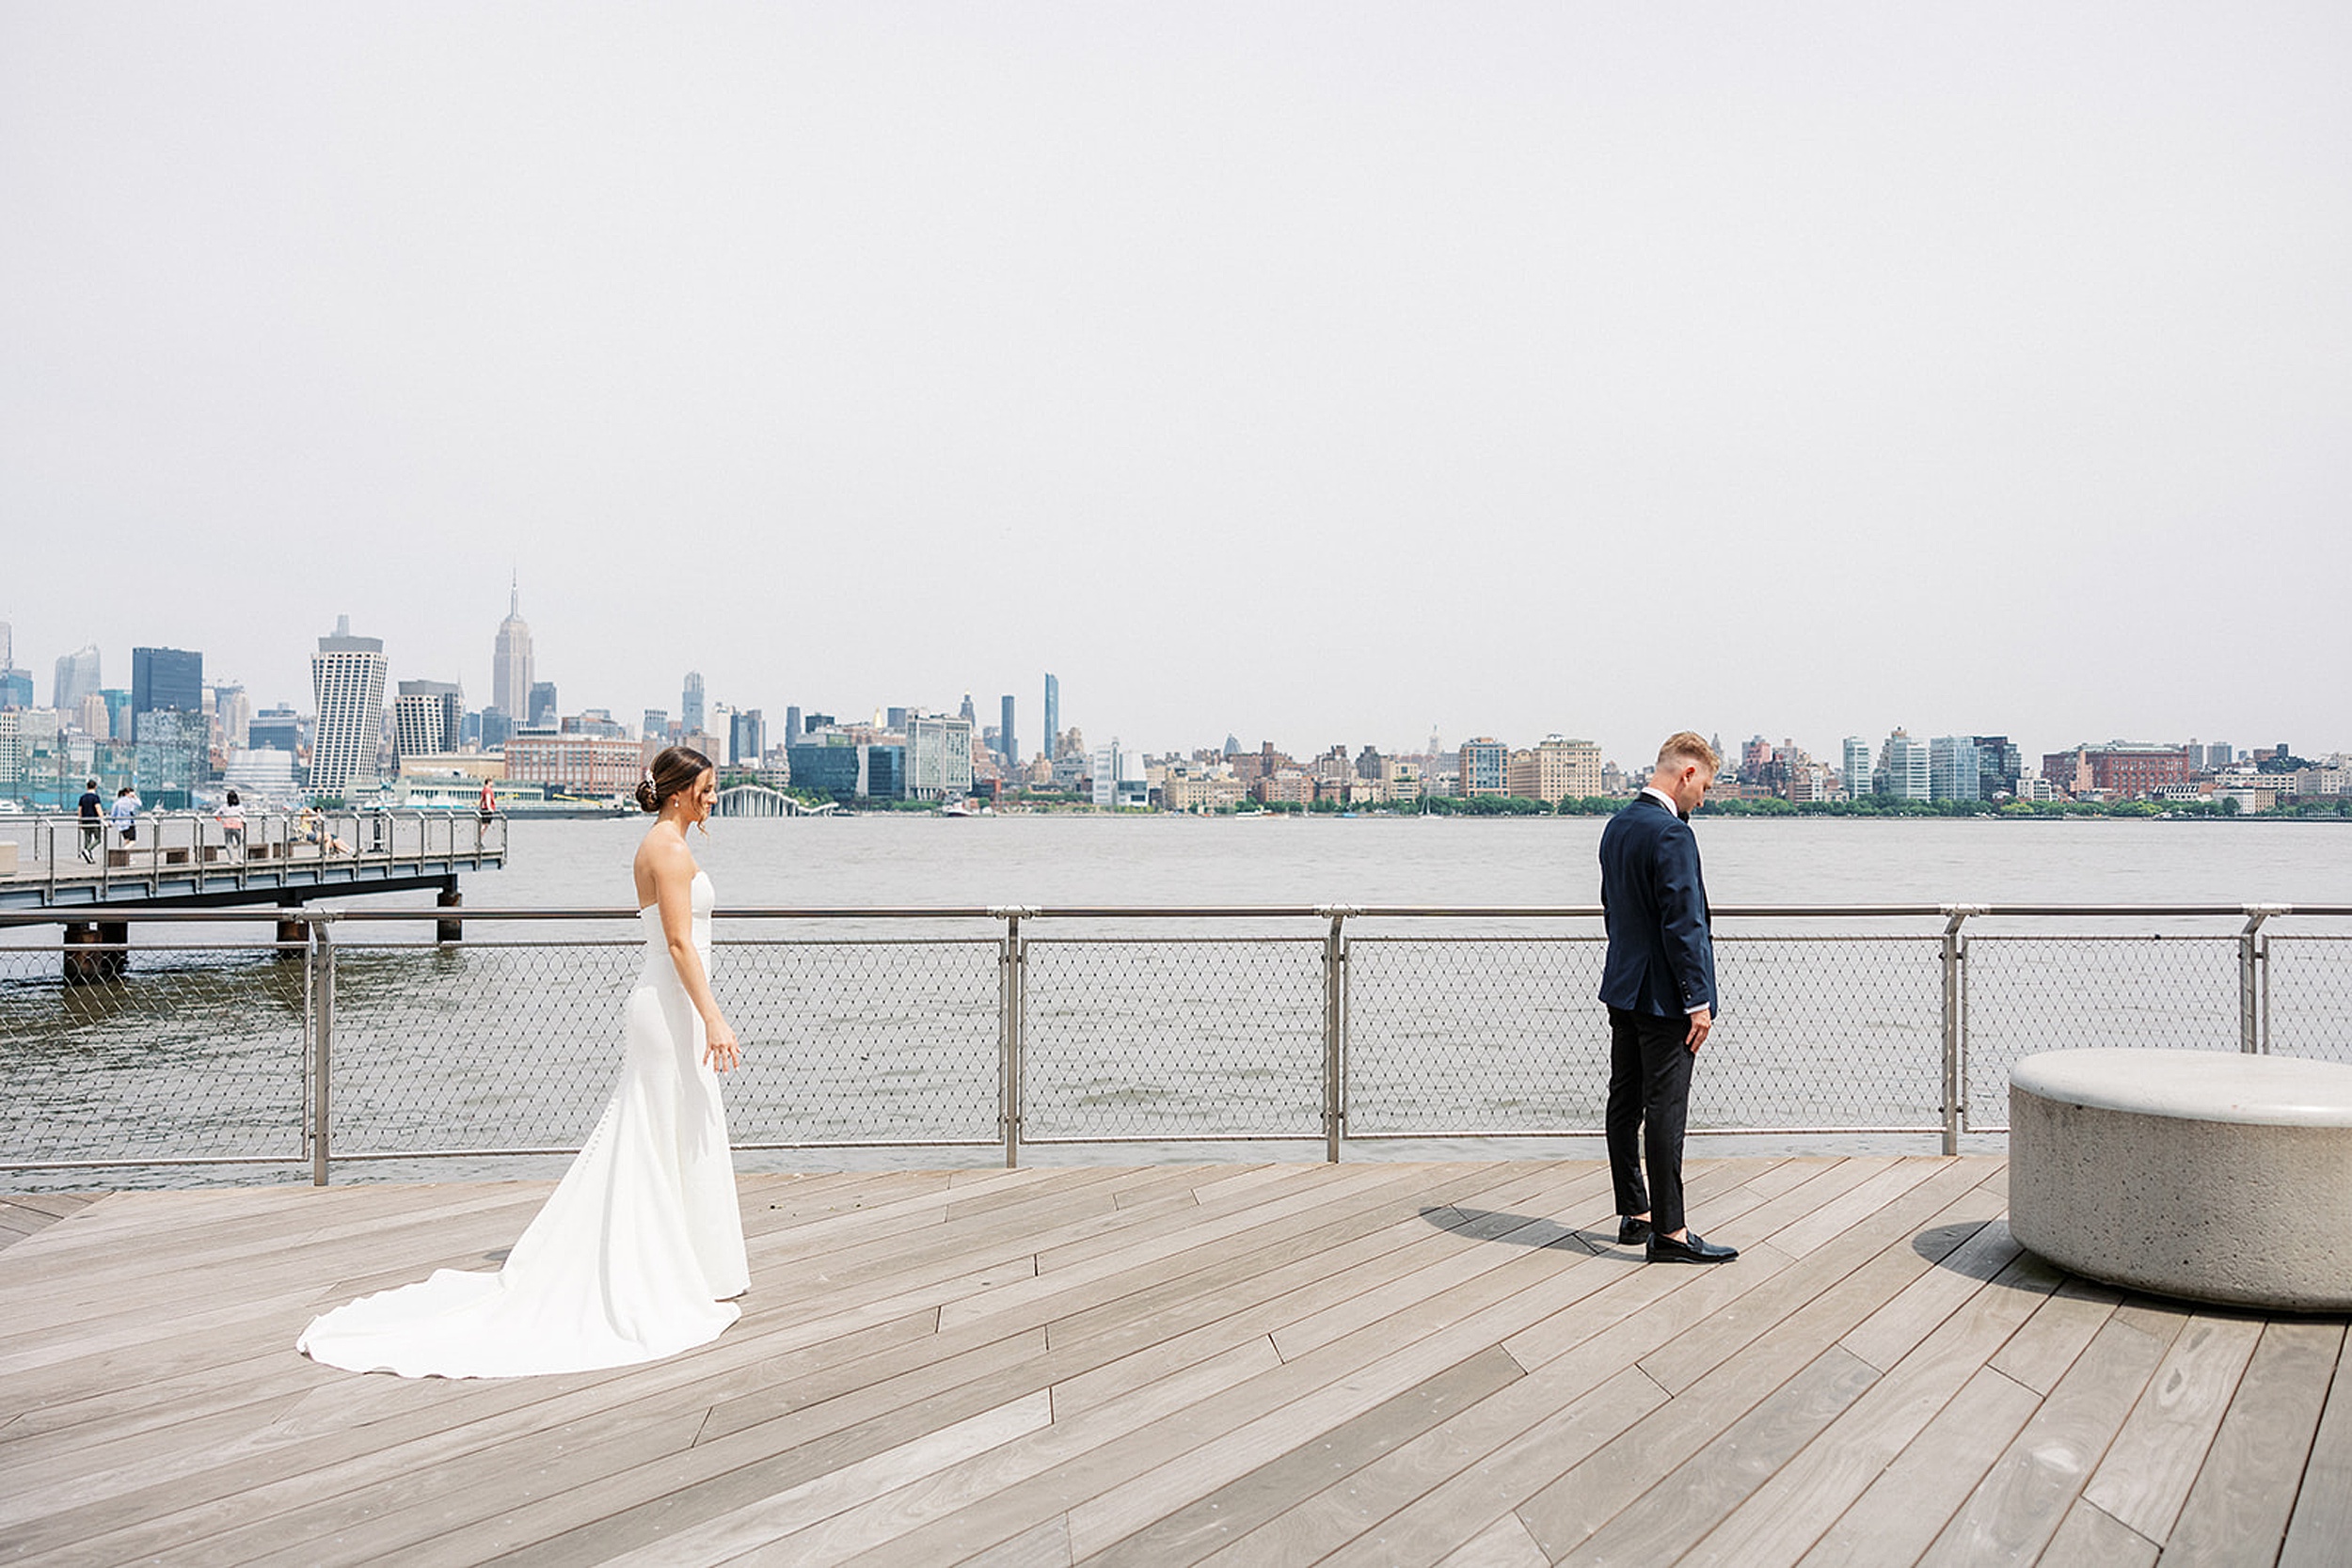 A groom waits for his bride to call him for their first look on a waterfront boardwalk